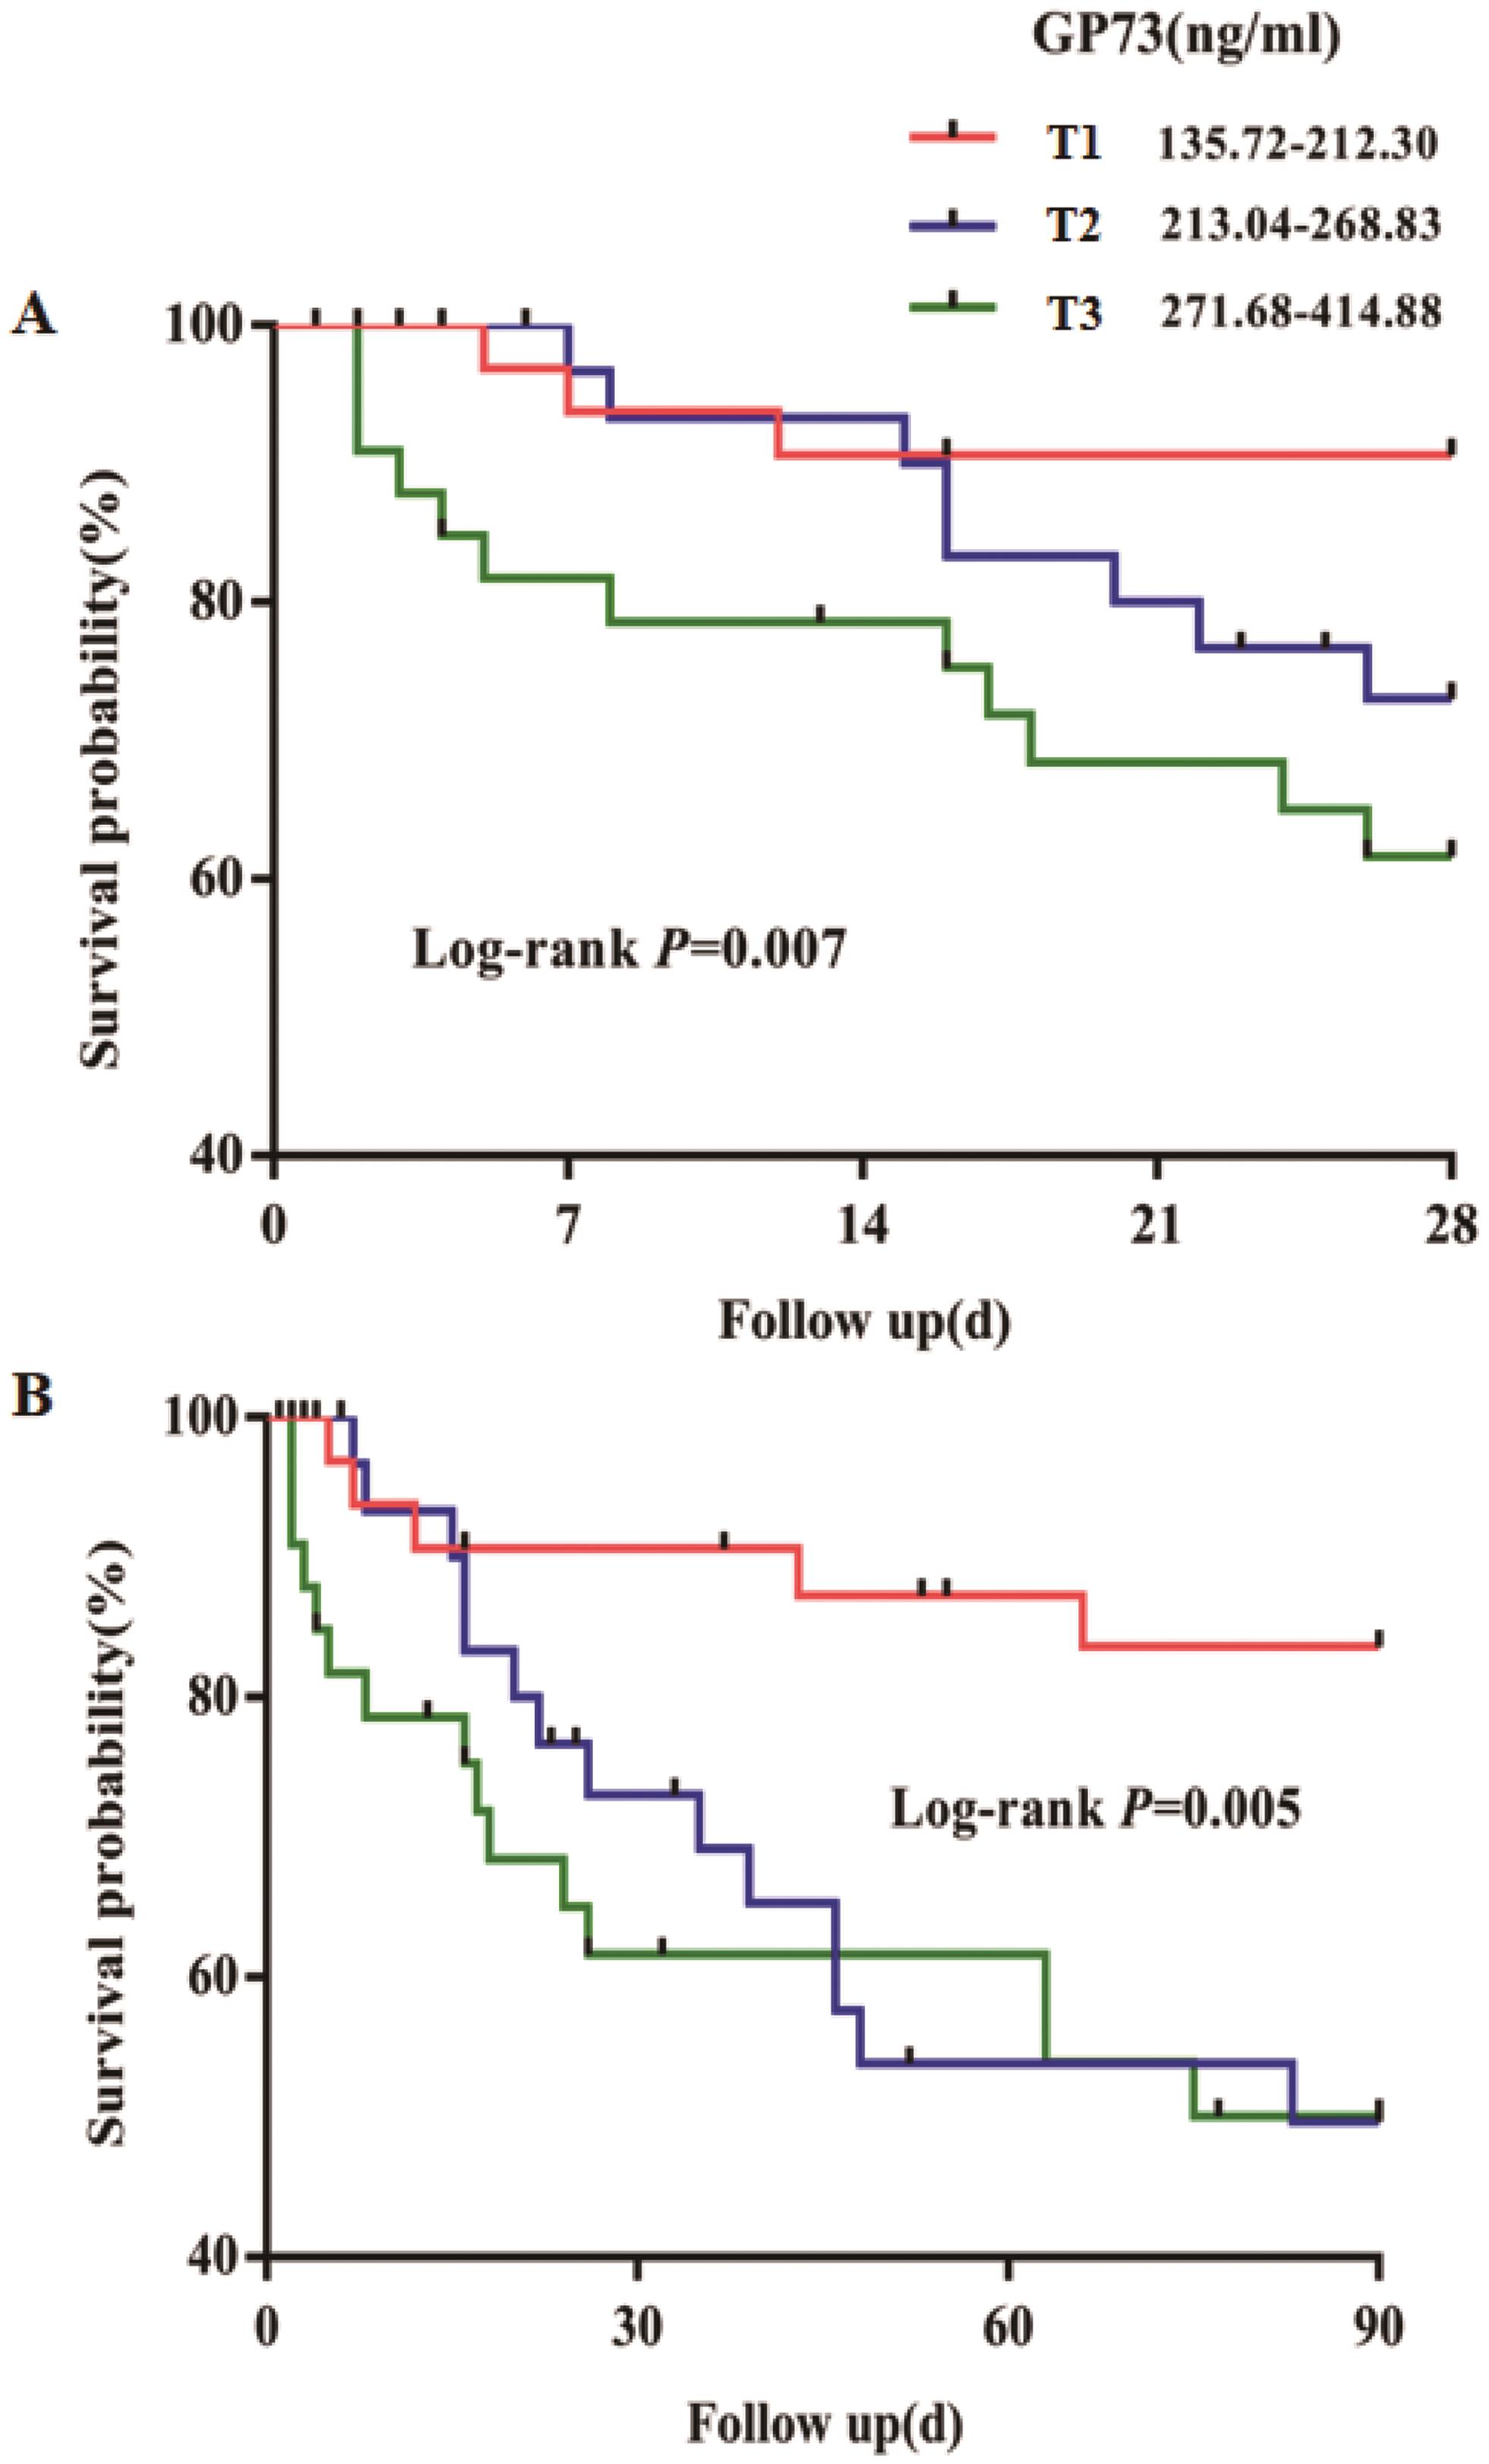 Kaplan-Meier curves showing the short-term probability of 28-day (A) and 90-day (B) survival among patients with ALD-ACLF stratified into tertiles in accordance with the serum GP73 level.